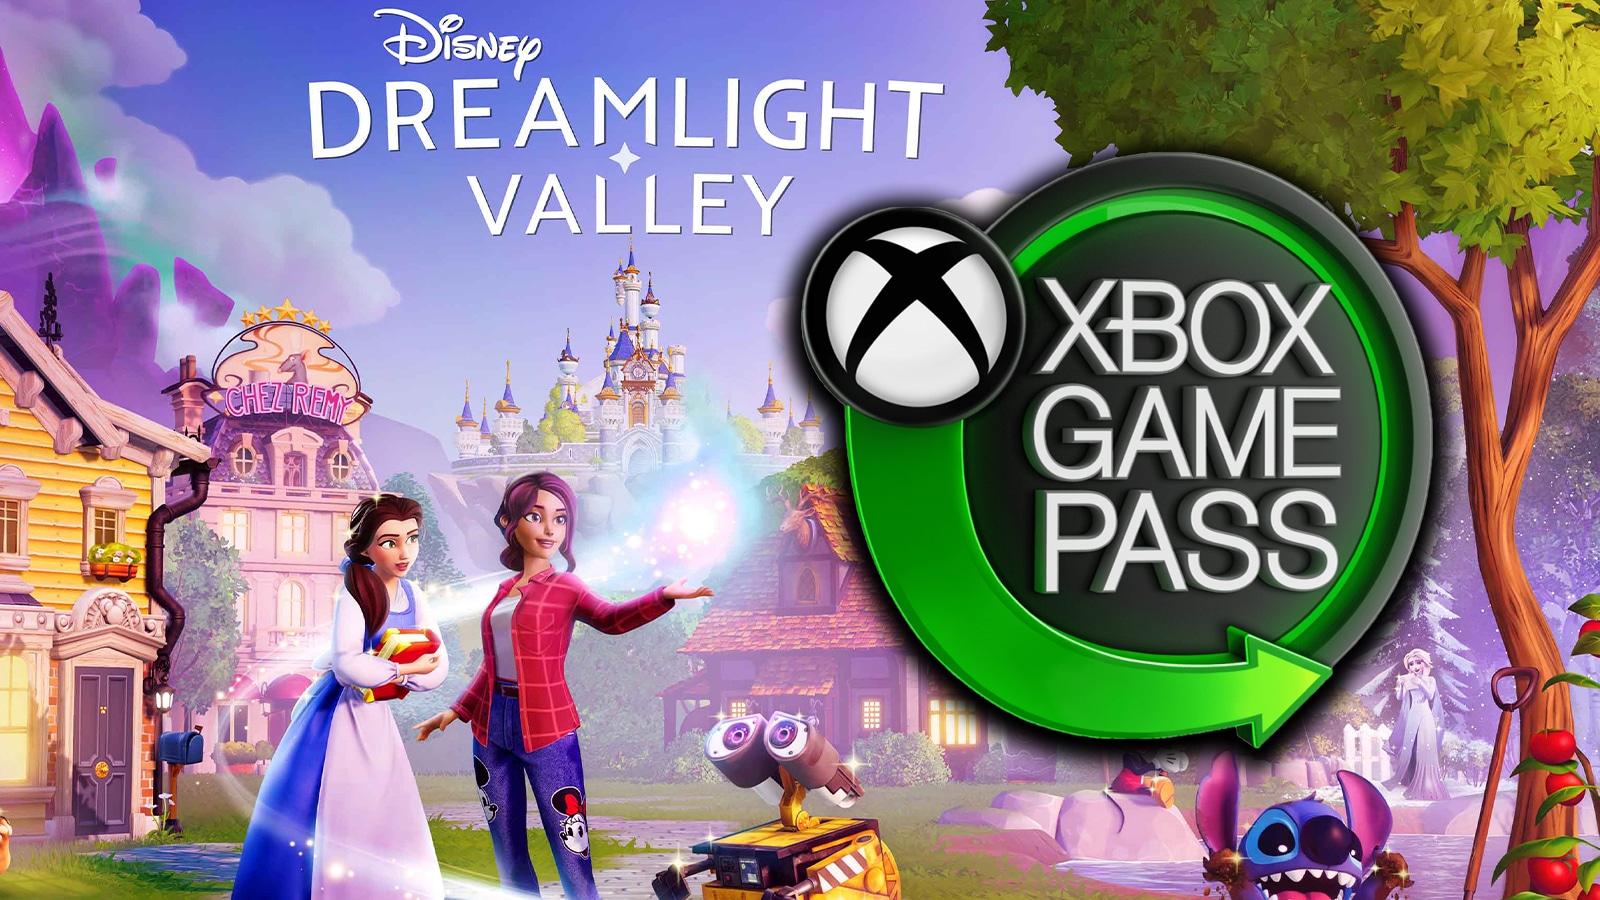 Xbox Game Pass Subscribers Should Keep an Eye on February 6